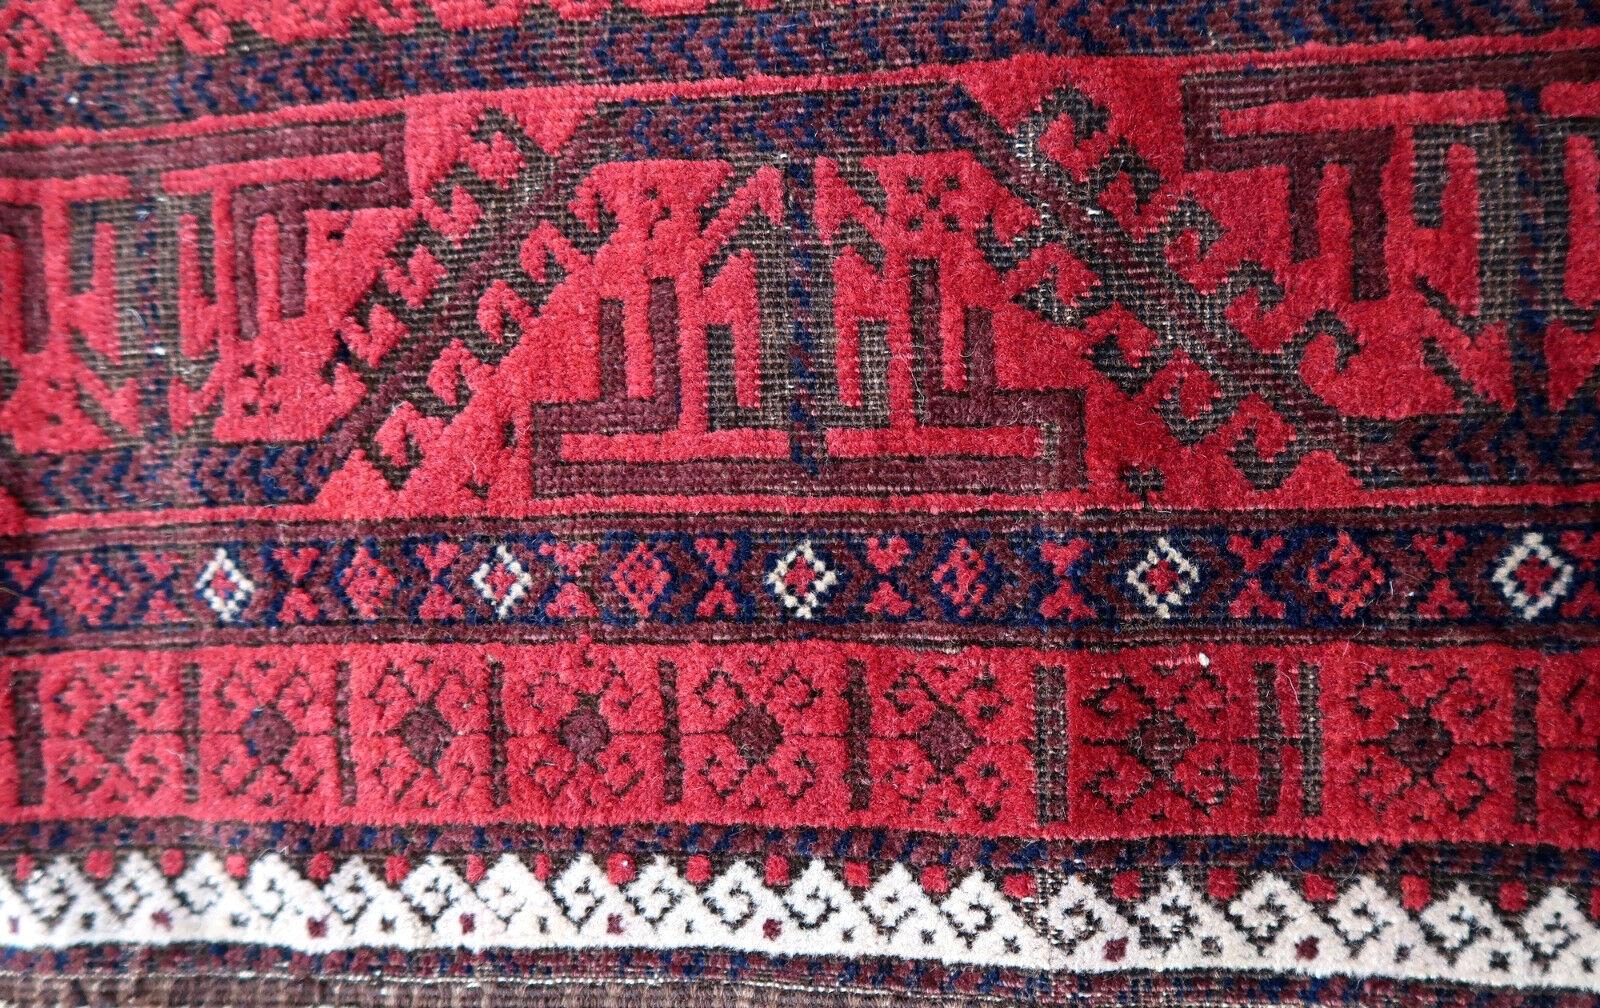 Handmade antique Baluch rug from Central Asia in original condition, it has some age wear and low pile. The rug is from the beginning of 20th century.

-Condition: Original, age wear, low pile,

-circa 1900s,

-Size: 3.3' x 6.2' (100cm x